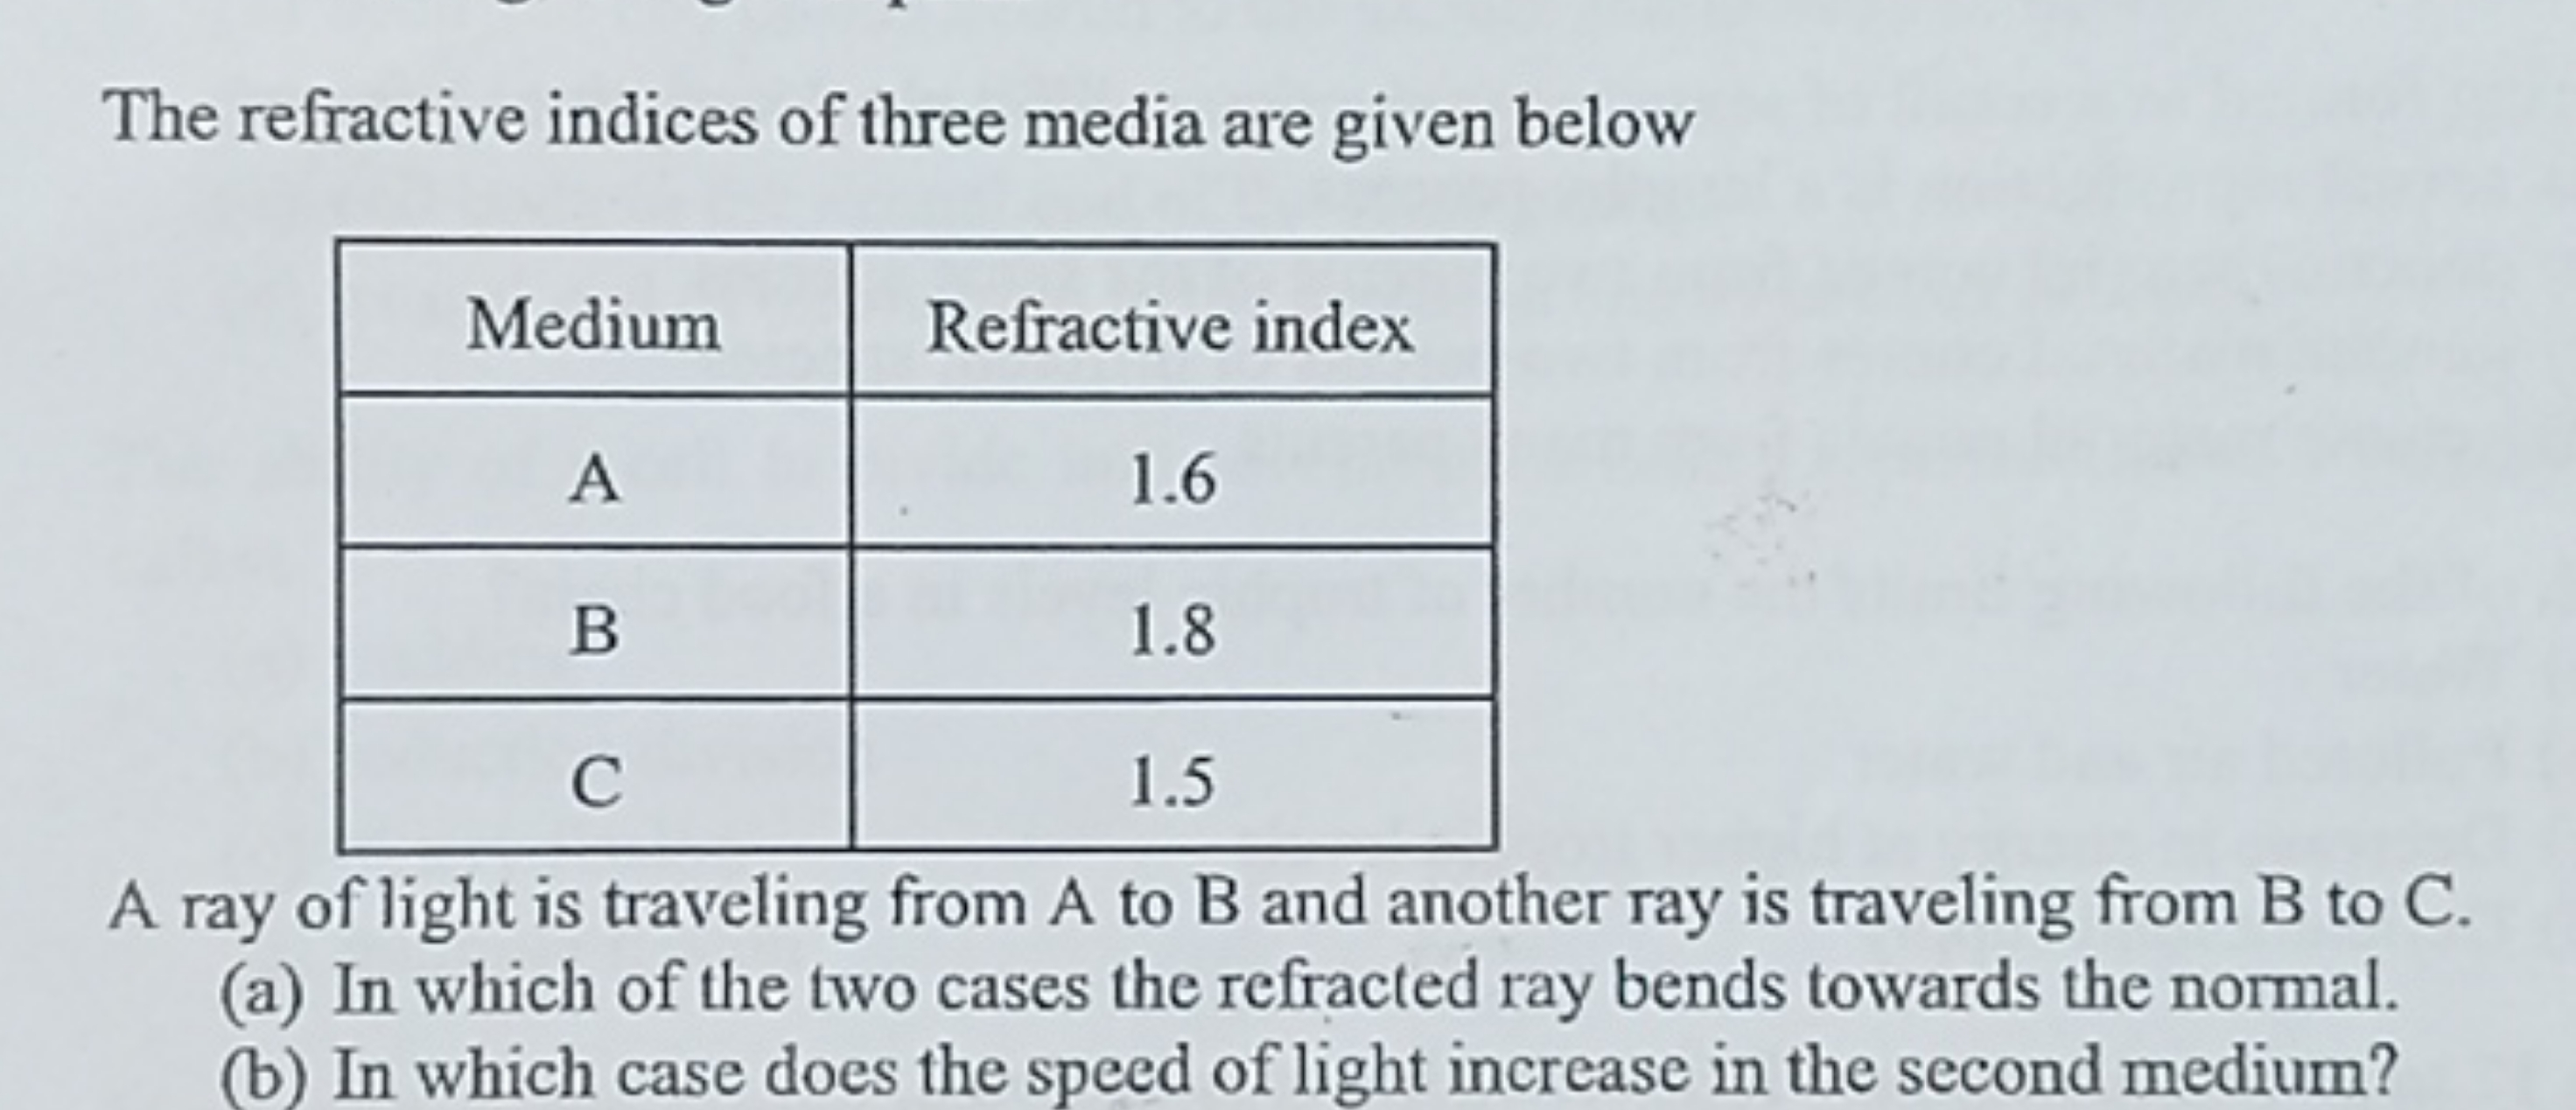 The refractive indices of three media are given below
MediumRefractive